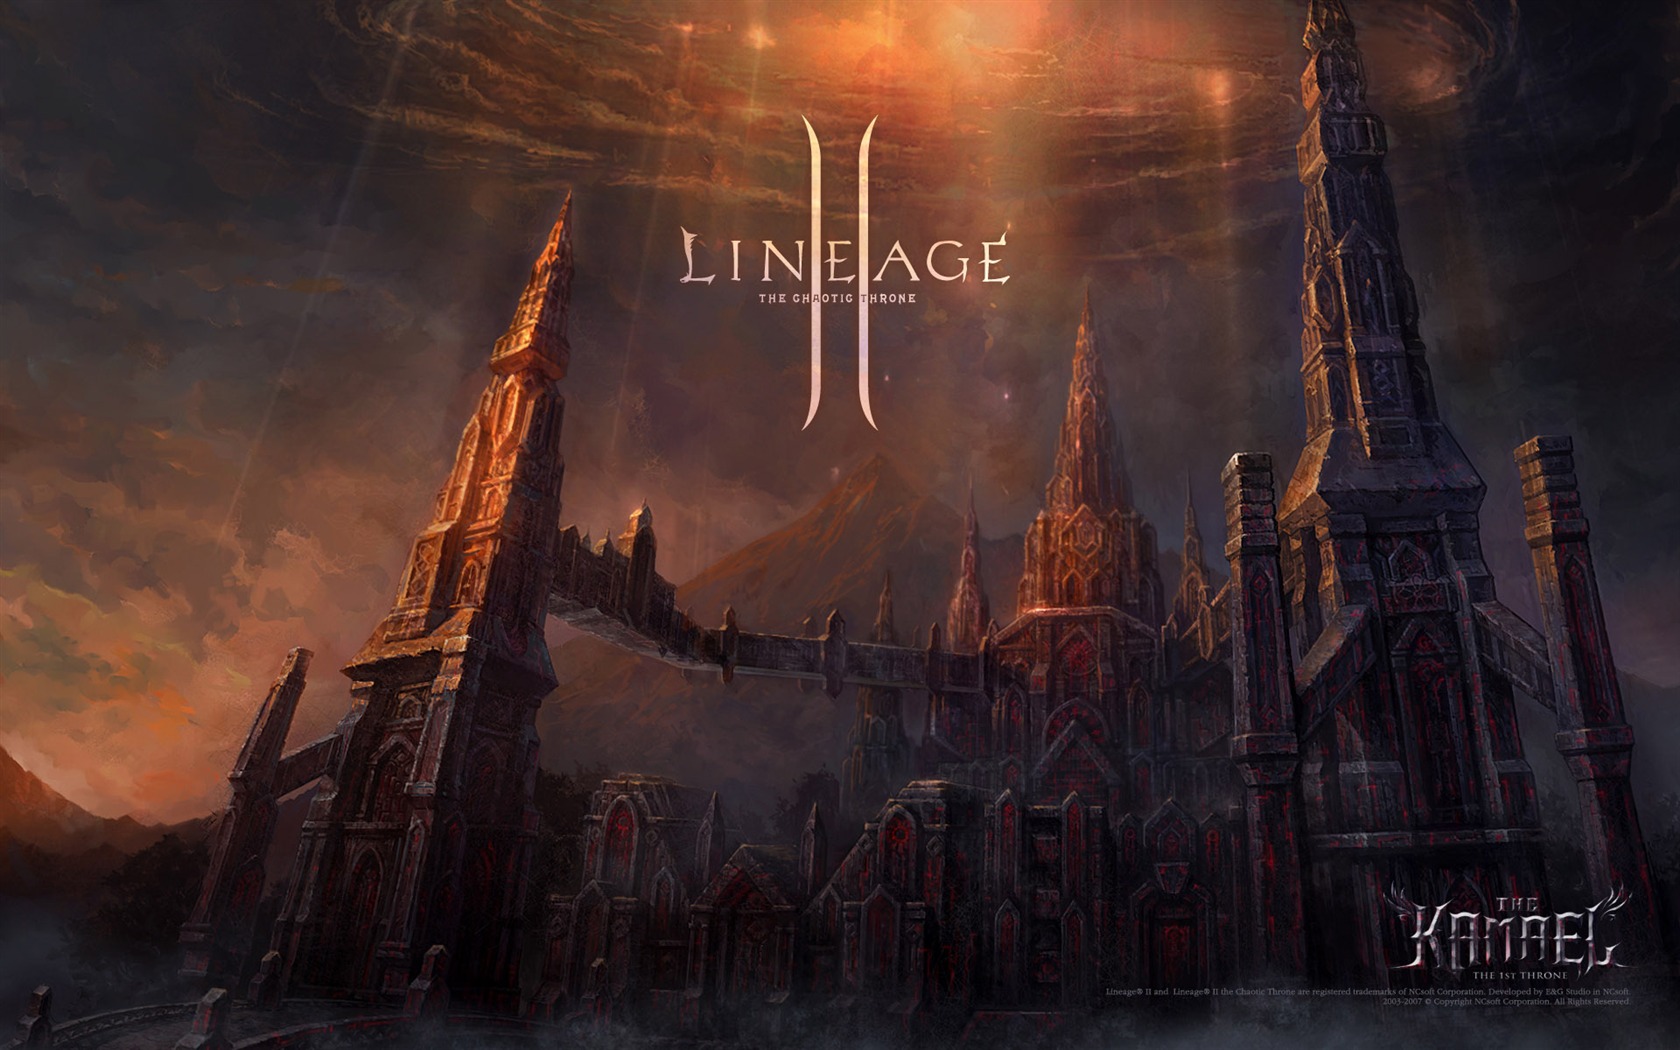 LINEAGE Ⅱ Modellierung HD-Gaming-Wallpaper #4 - 1680x1050